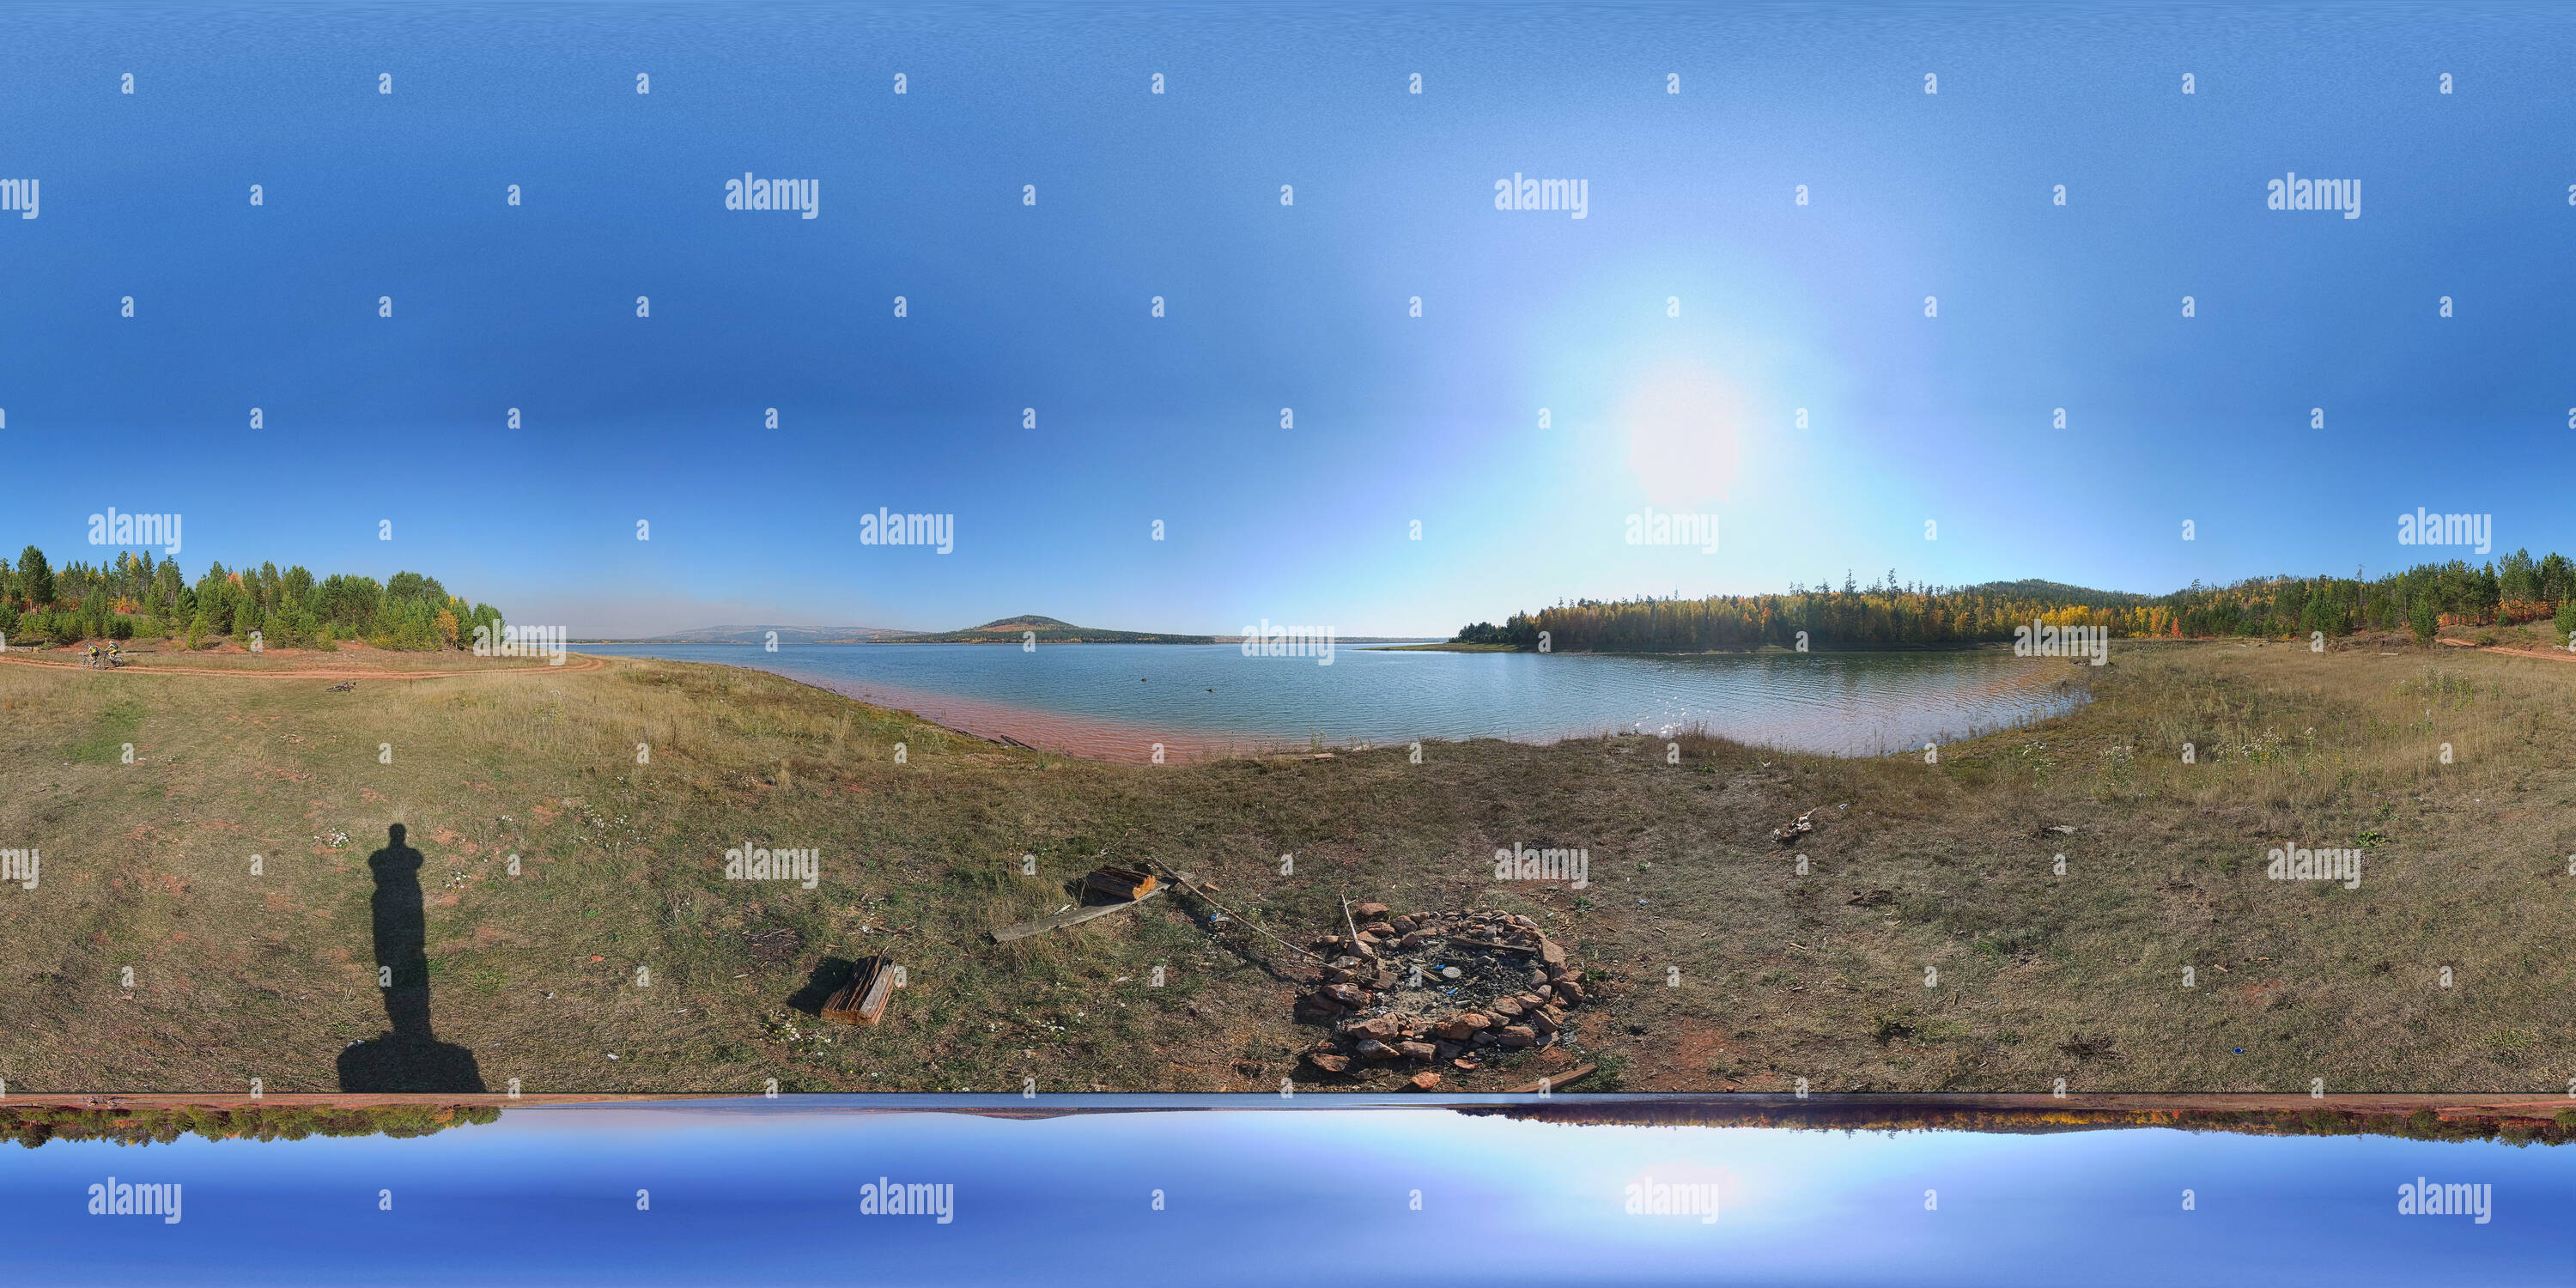 360 degree panoramic view of On Soldatskiy bay with Velobratsk and on the road to the abandoned summer naval camp Varyag [2016.09.18]